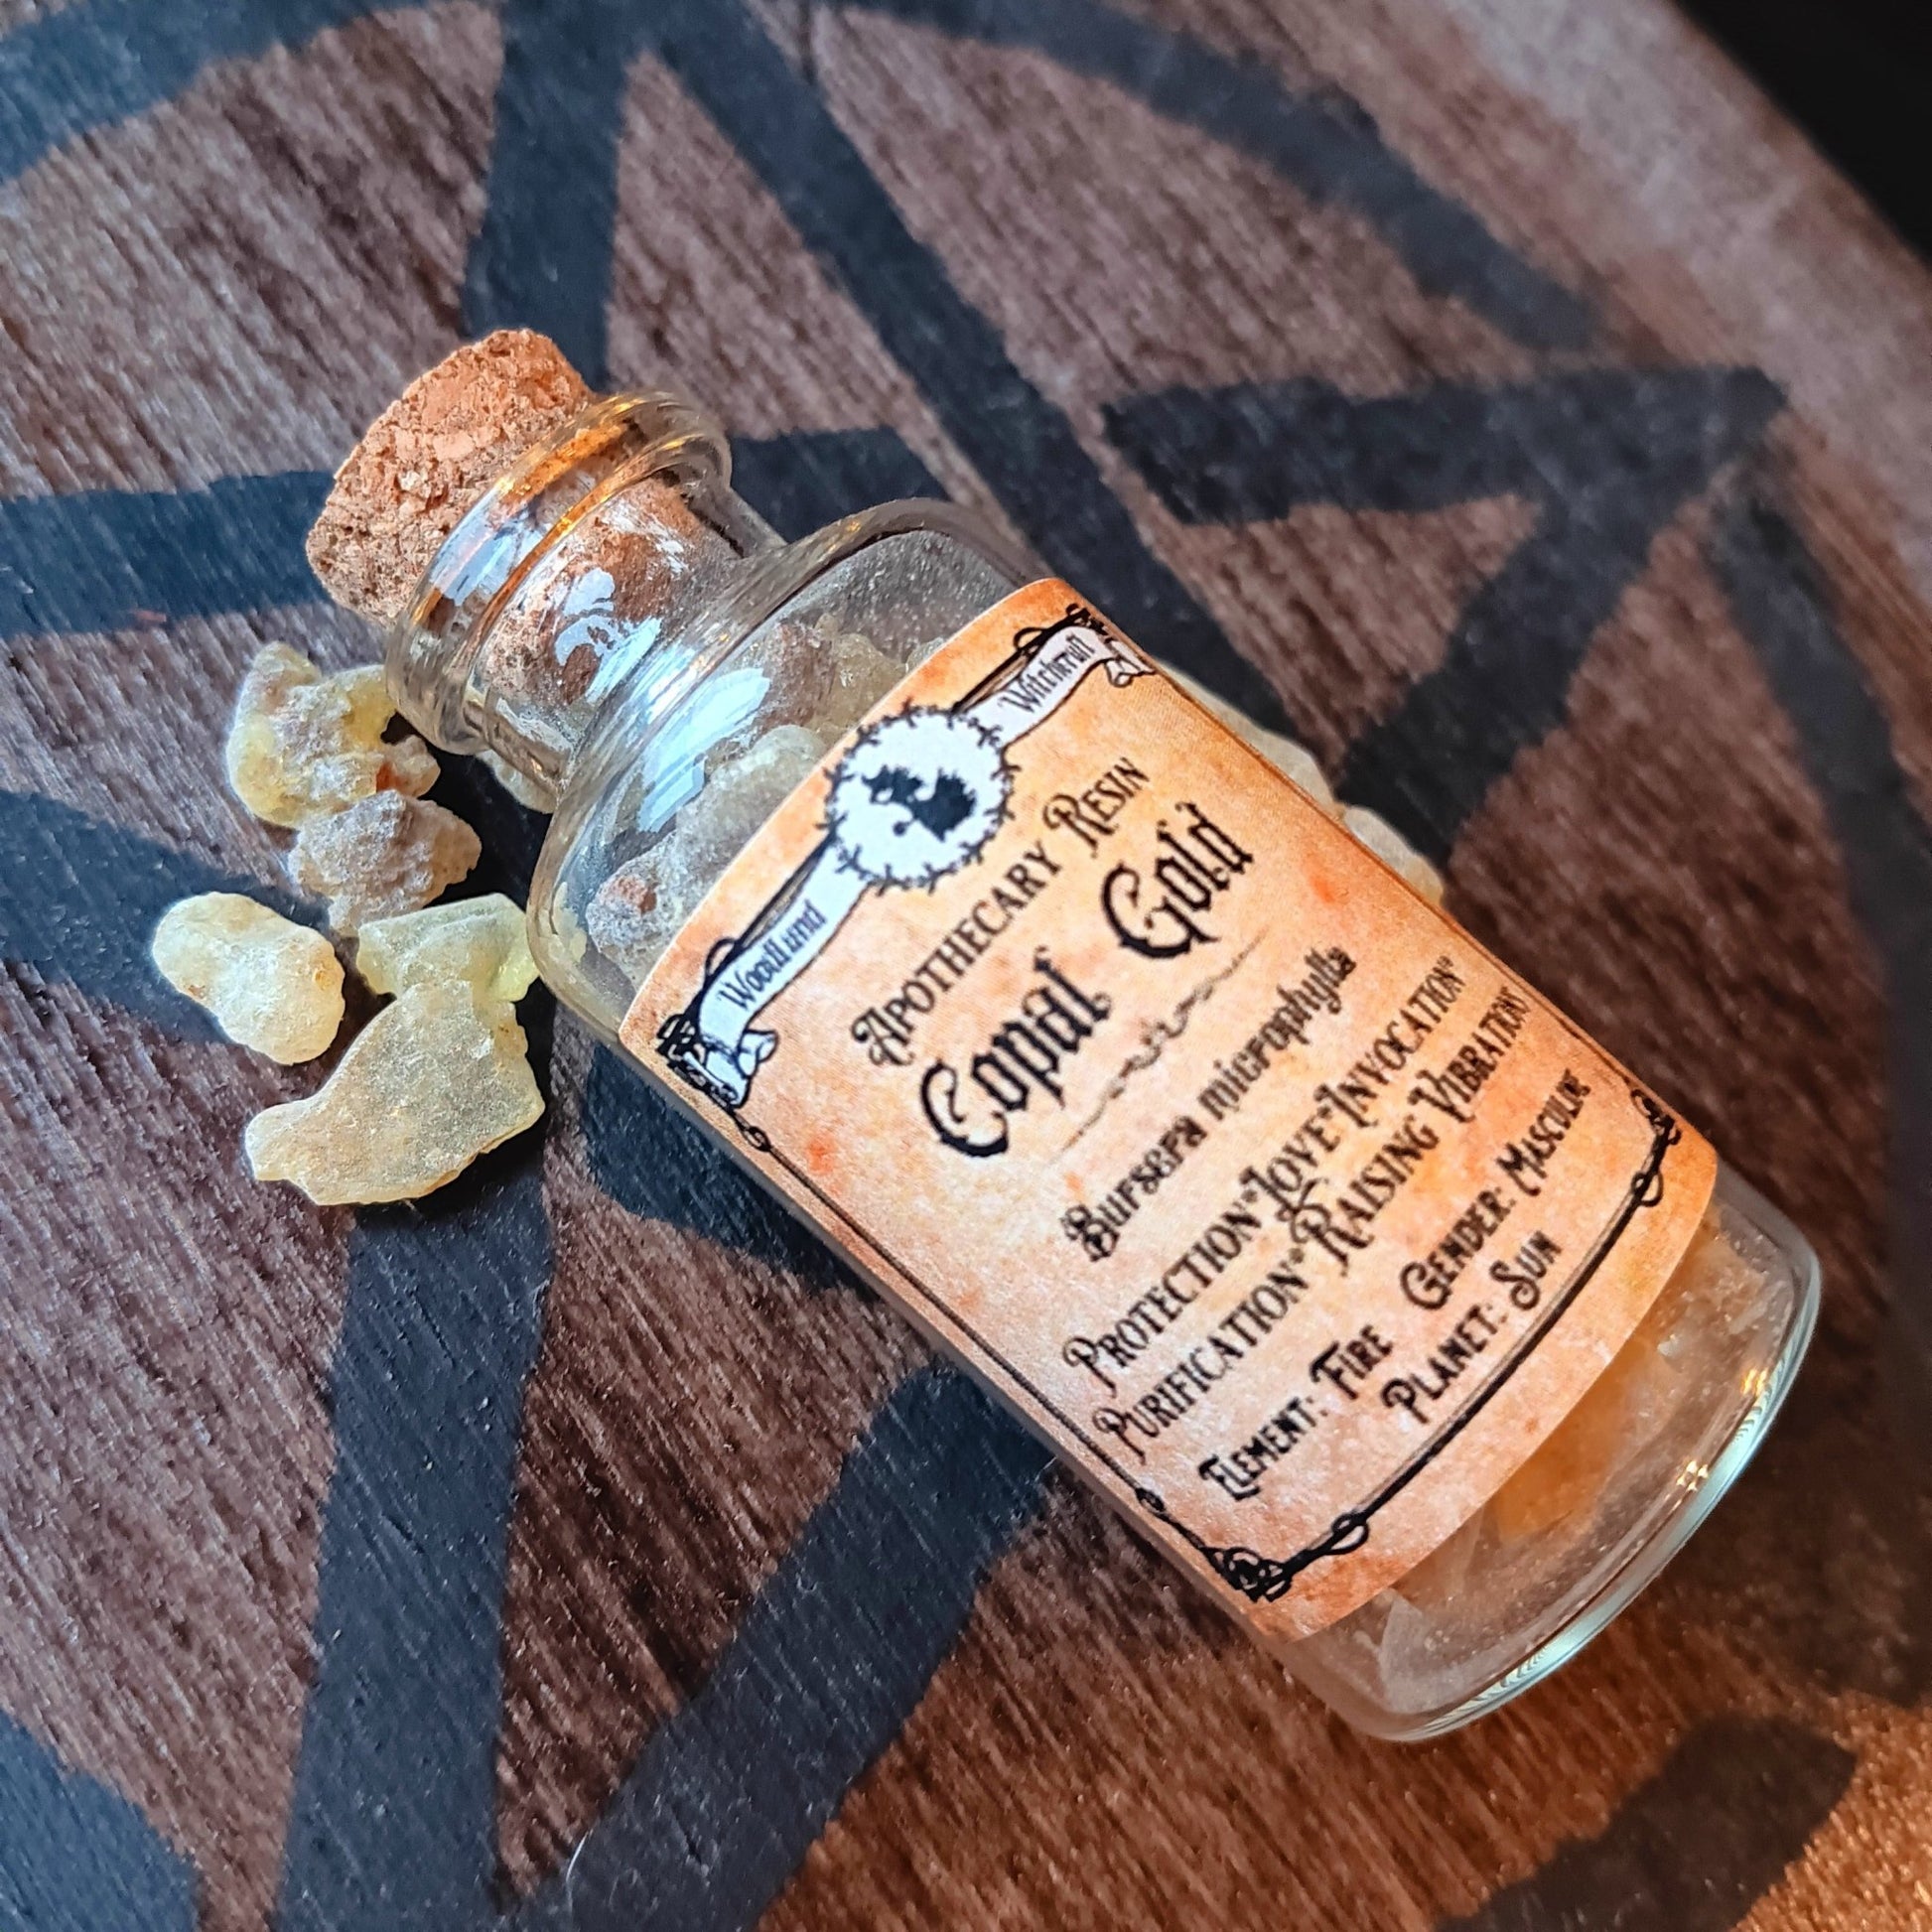 COPAL GOLD APOTHECARY RESIN Woodland Witchcraft